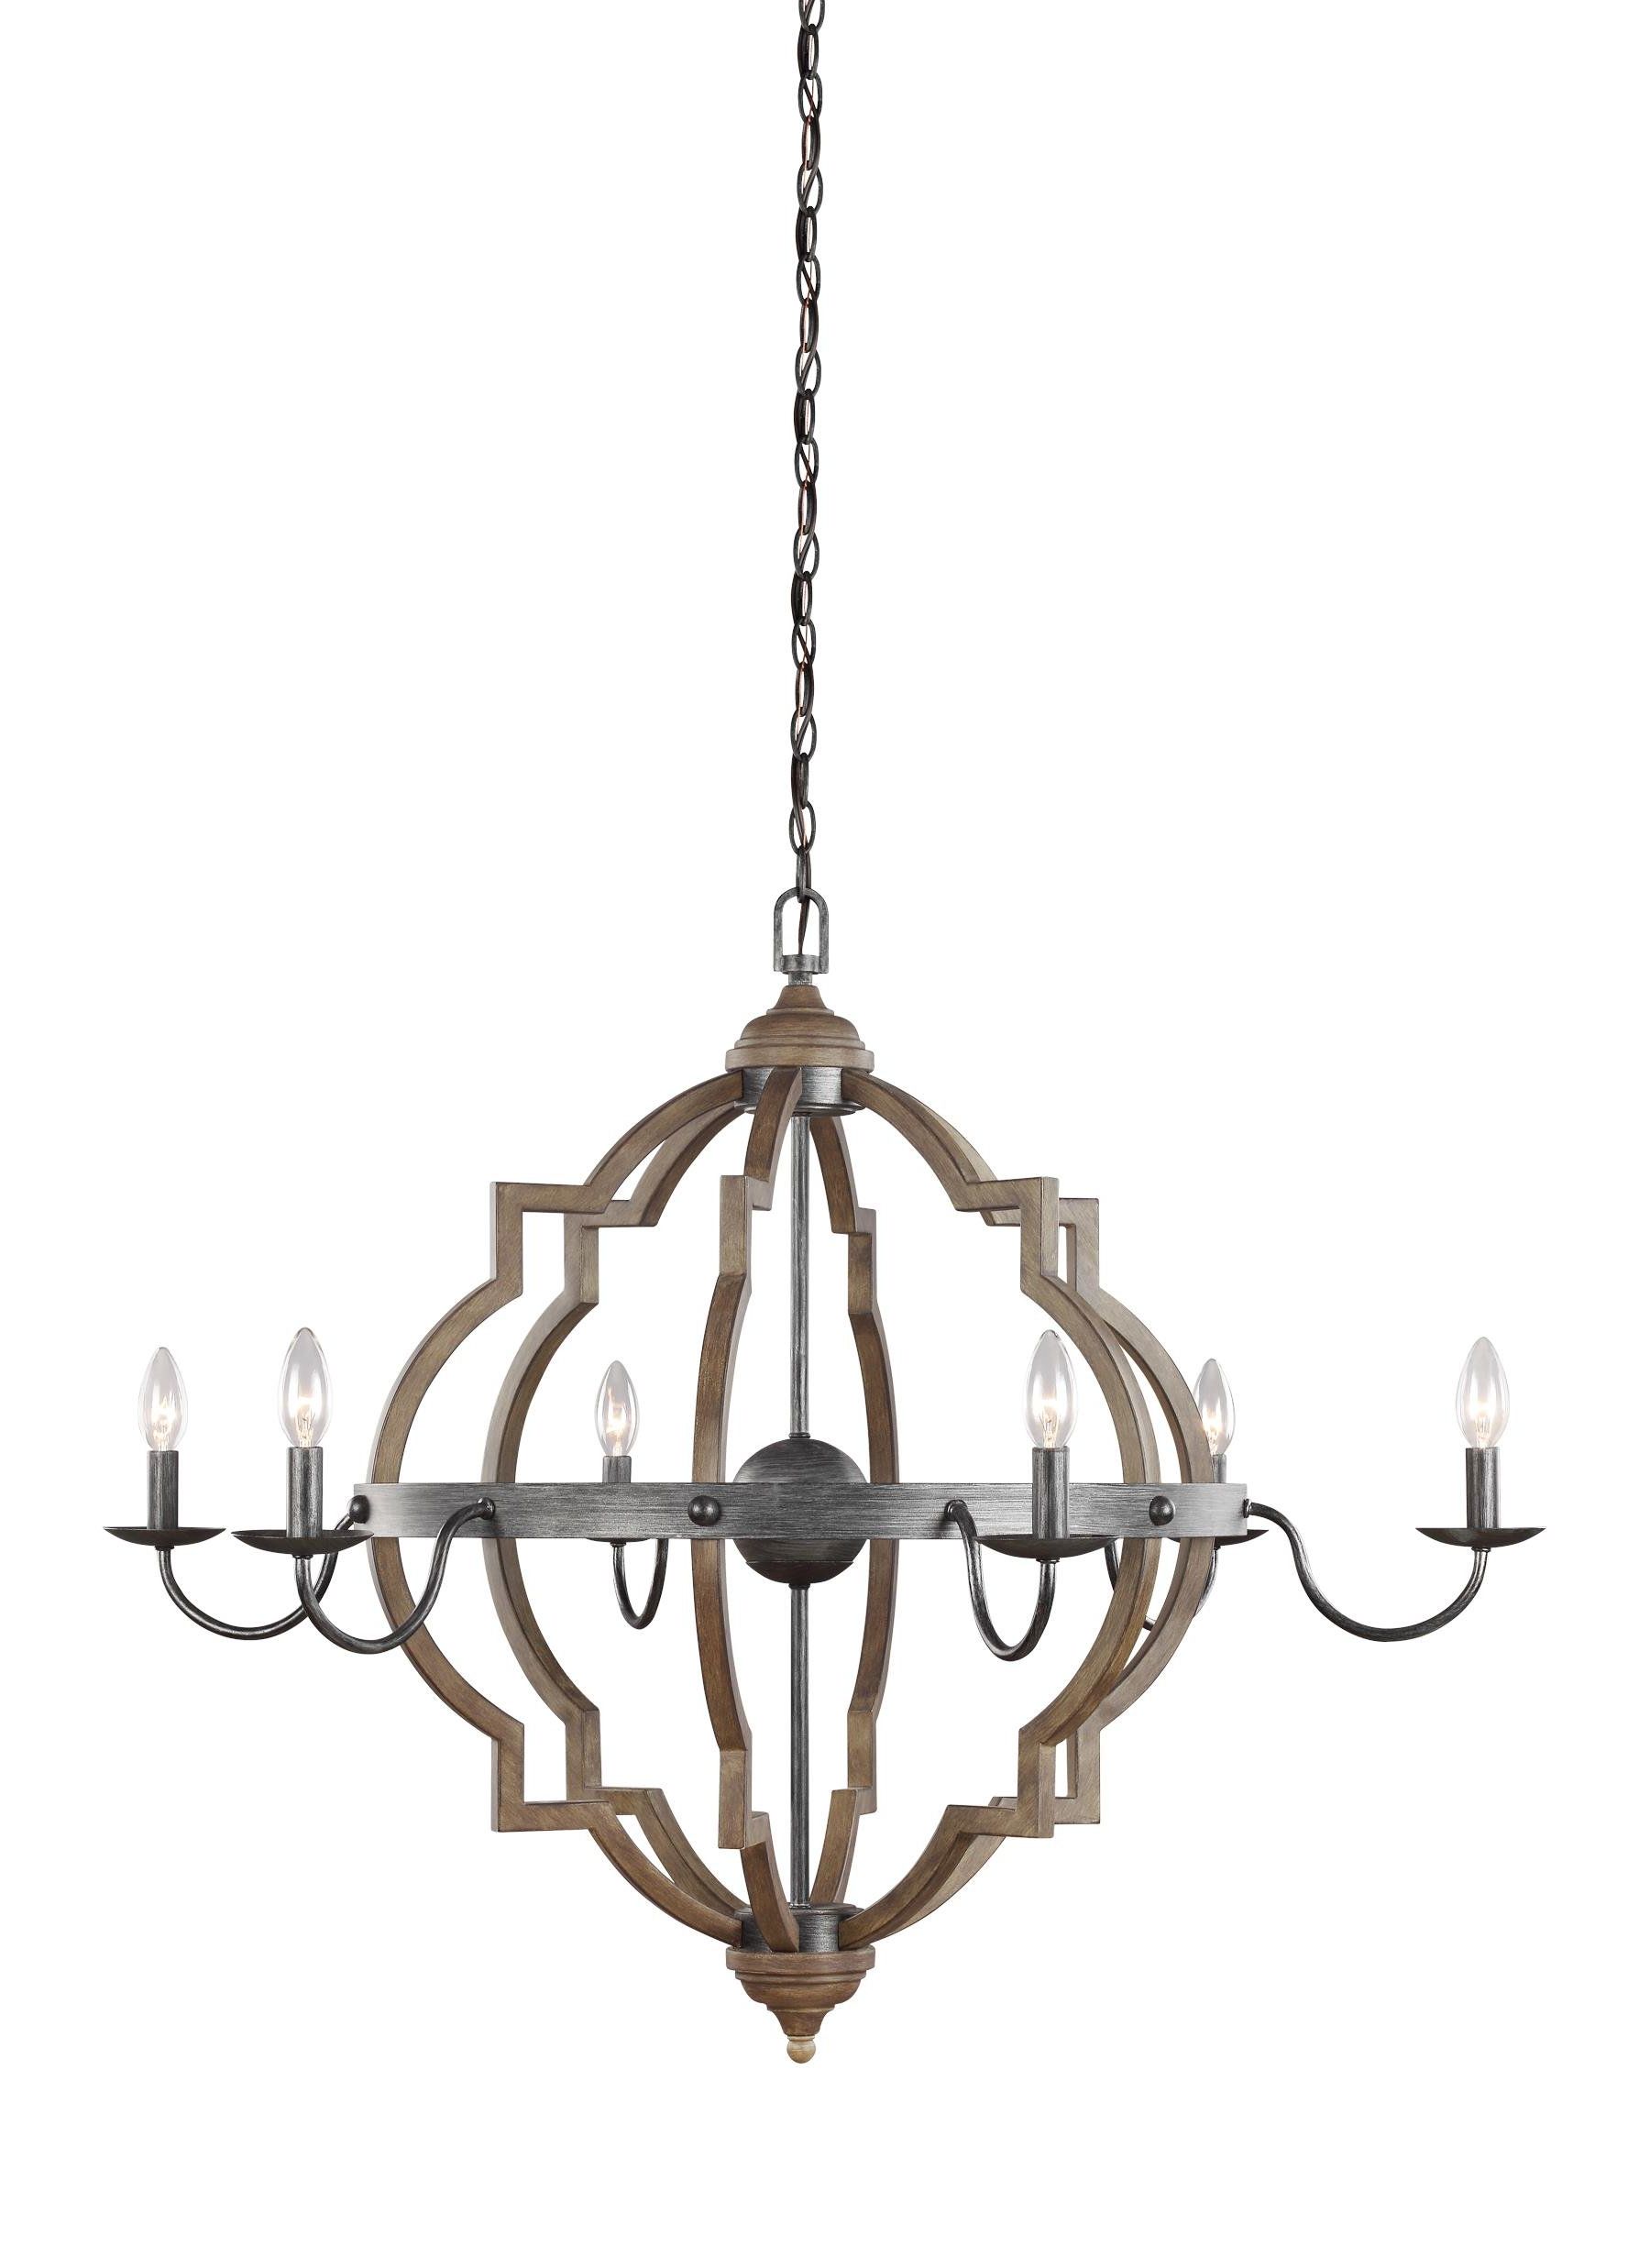 Fashionable Bennington 4 Light Candle Style Chandeliers Intended For Donna 6 Light Candle Style Chandelier (View 12 of 25)